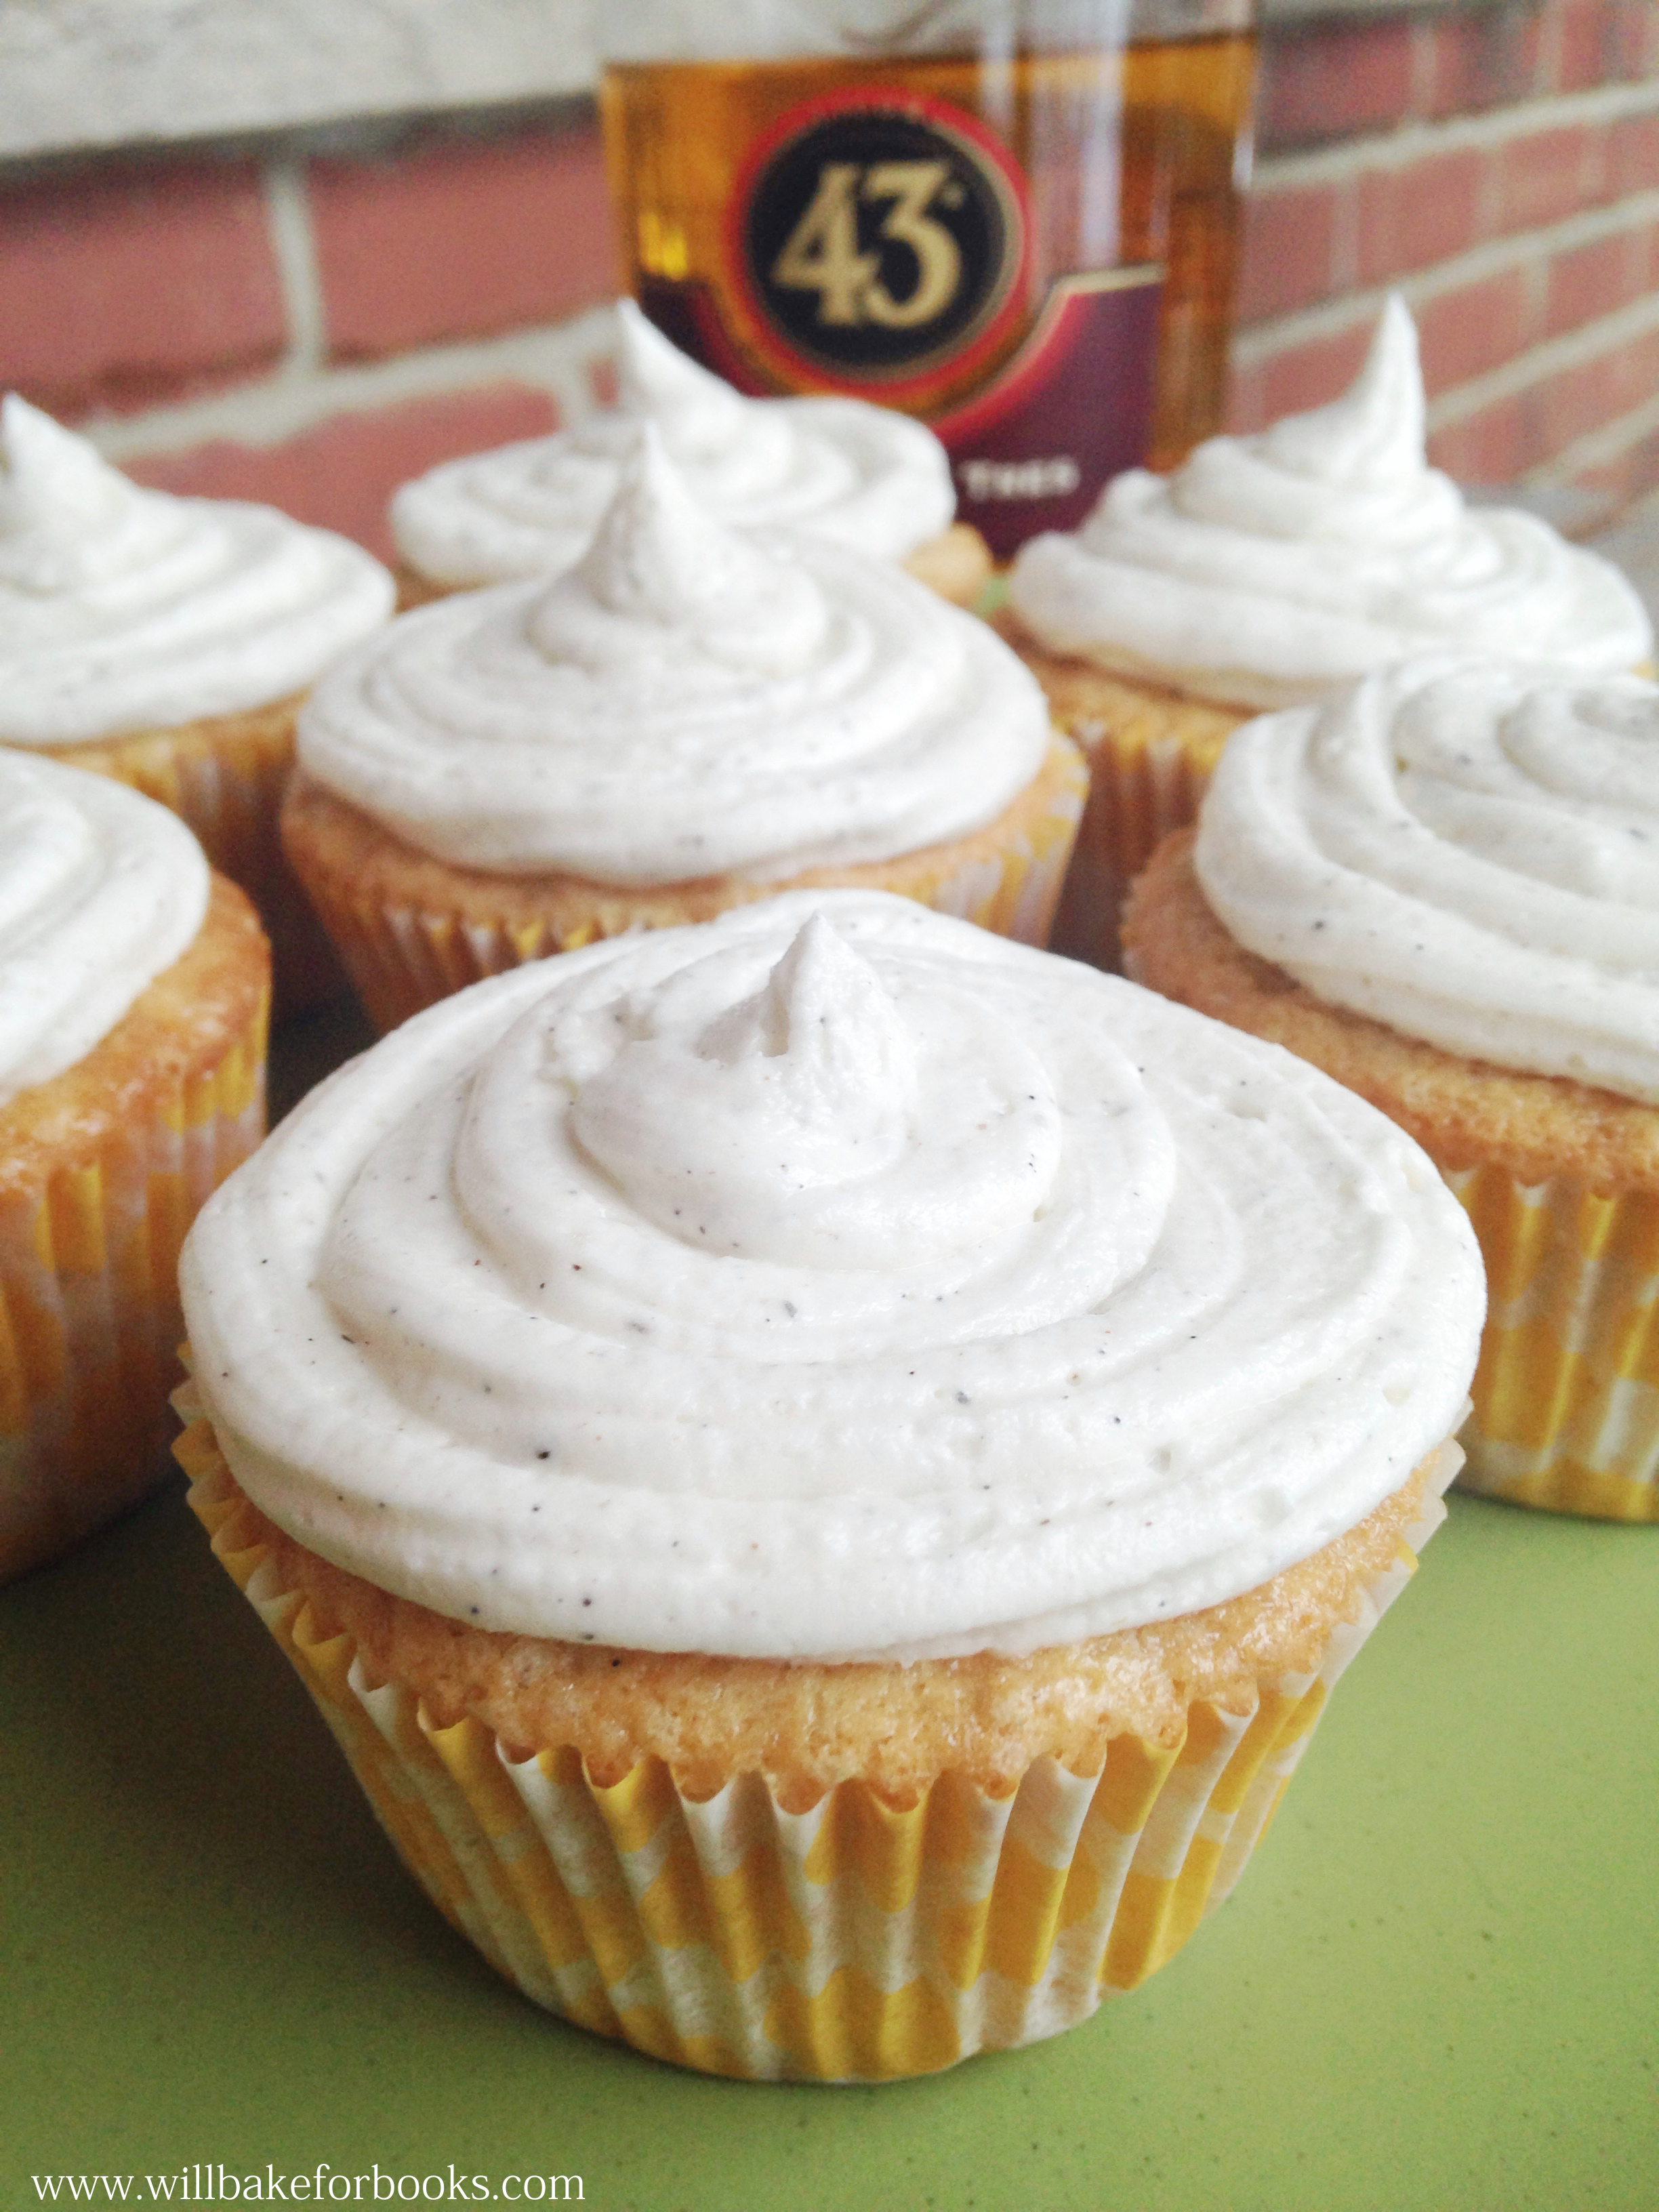 Licor 43 Cupcakes | Vanilla cupcakes brushed with a vanilla and citrus liquor and frosting! Found on willbakeforbooks.com